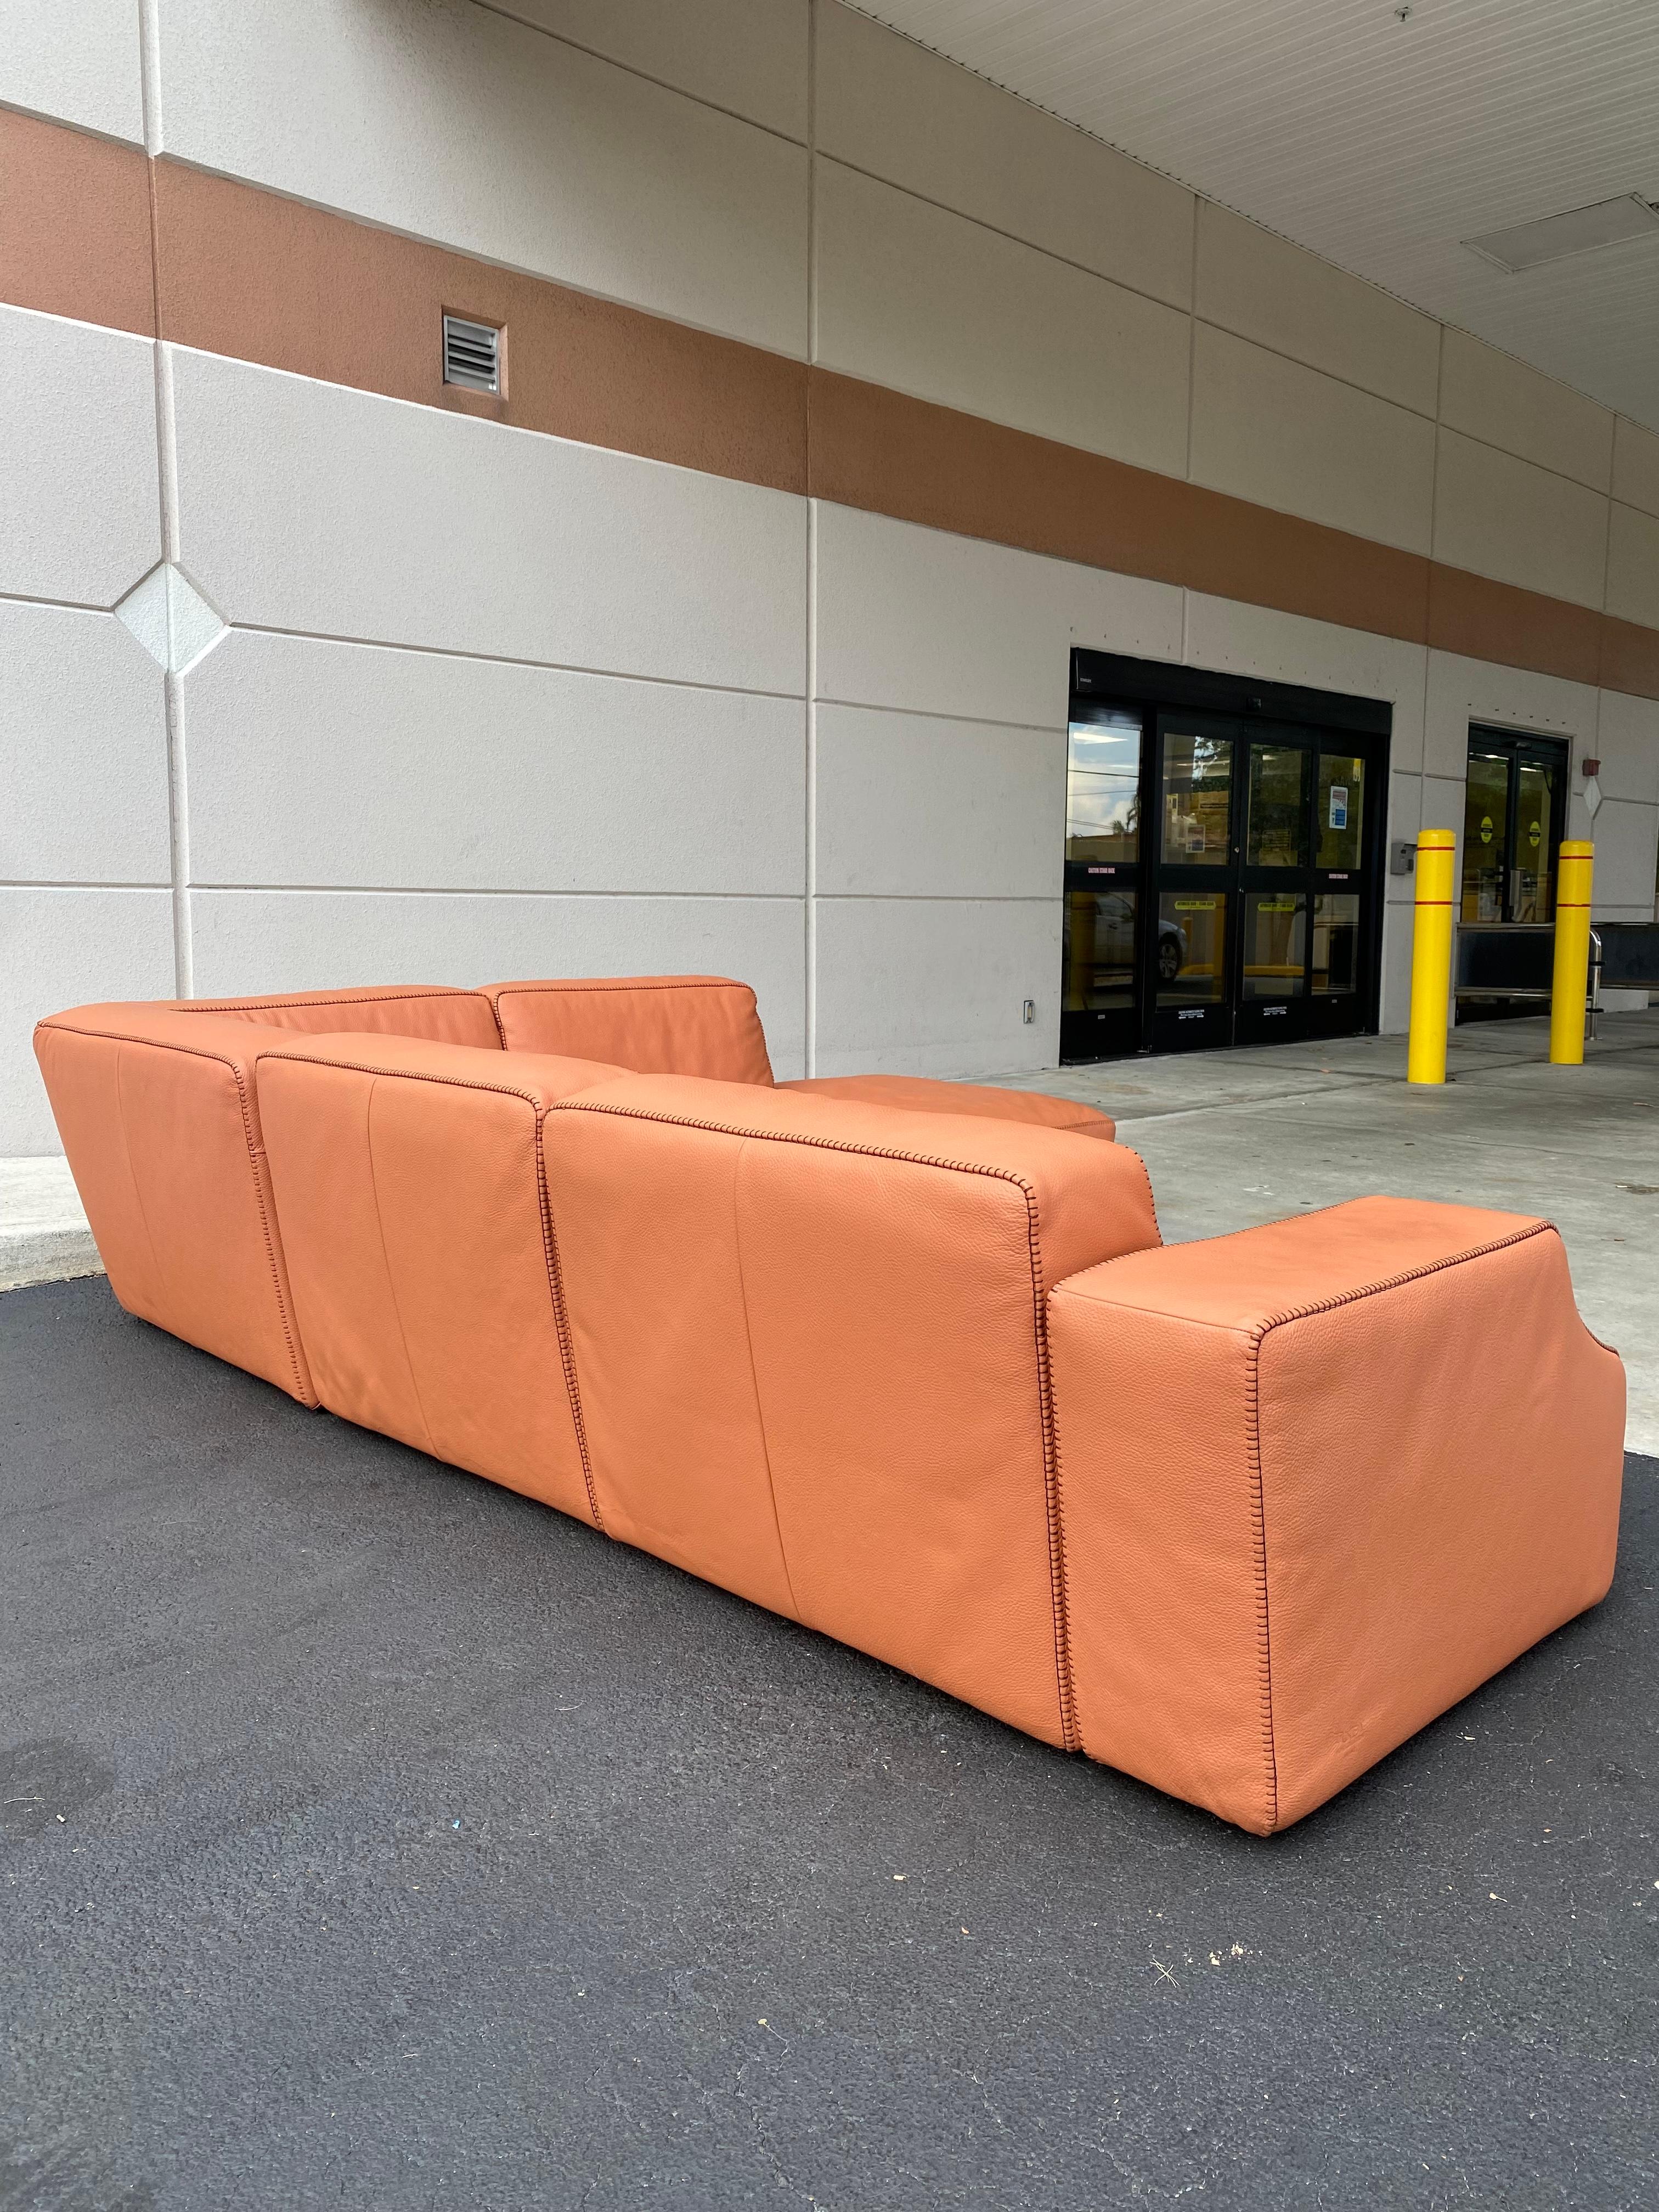 Gamma Arredamenti Dandy Collection Pumpkin Orange Cloud Leather Sectional In Excellent Condition For Sale In Fort Lauderdale, FL